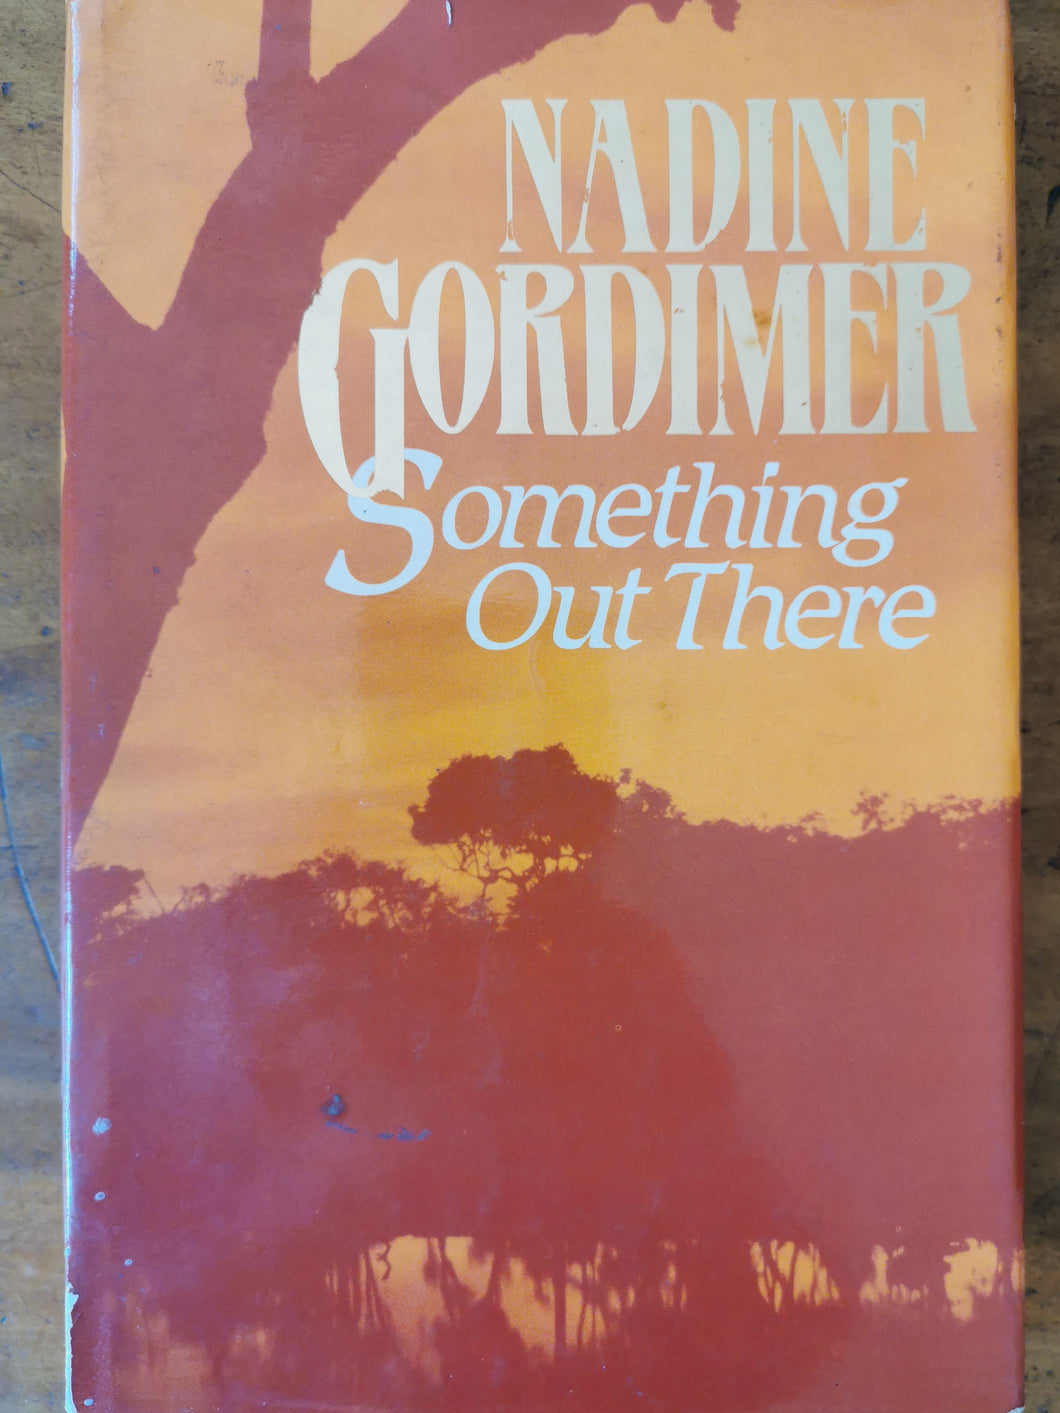 Nadine Gordimer - Something out there